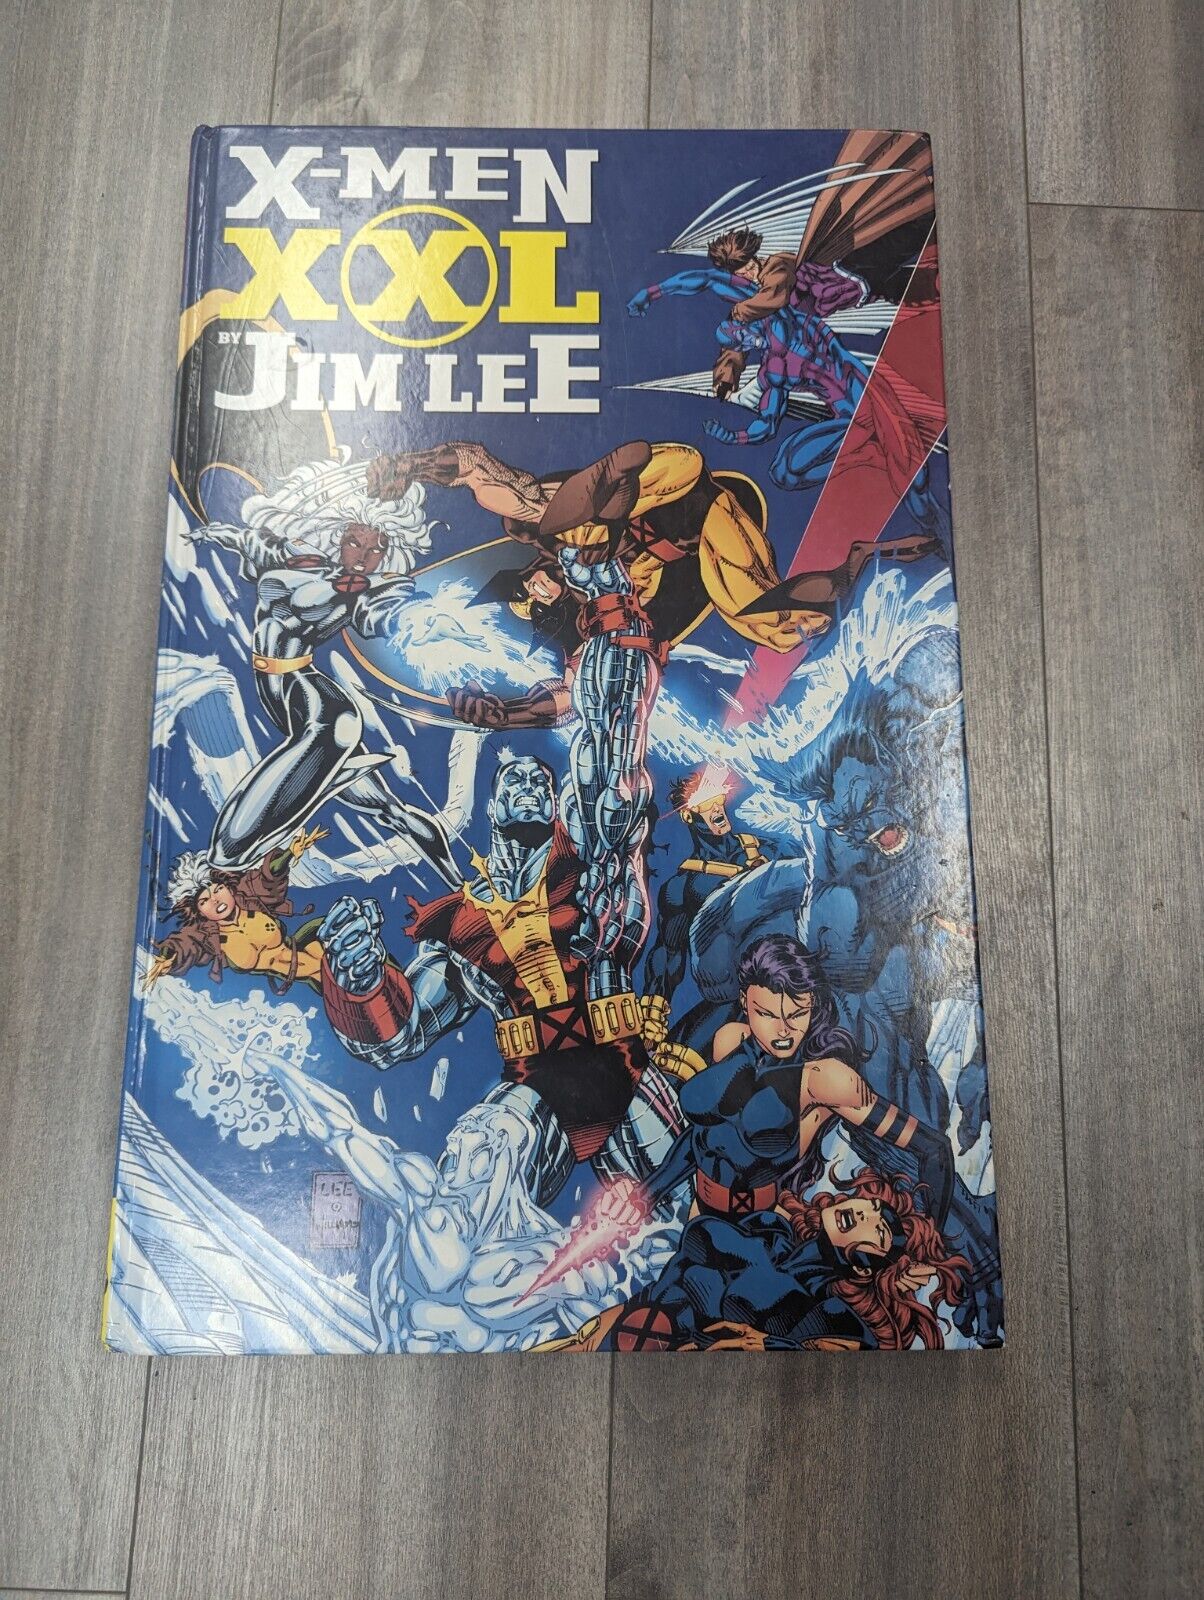 JIM LEE XXL By Chris Claremont - HUGE Hardcover over 12 lbs